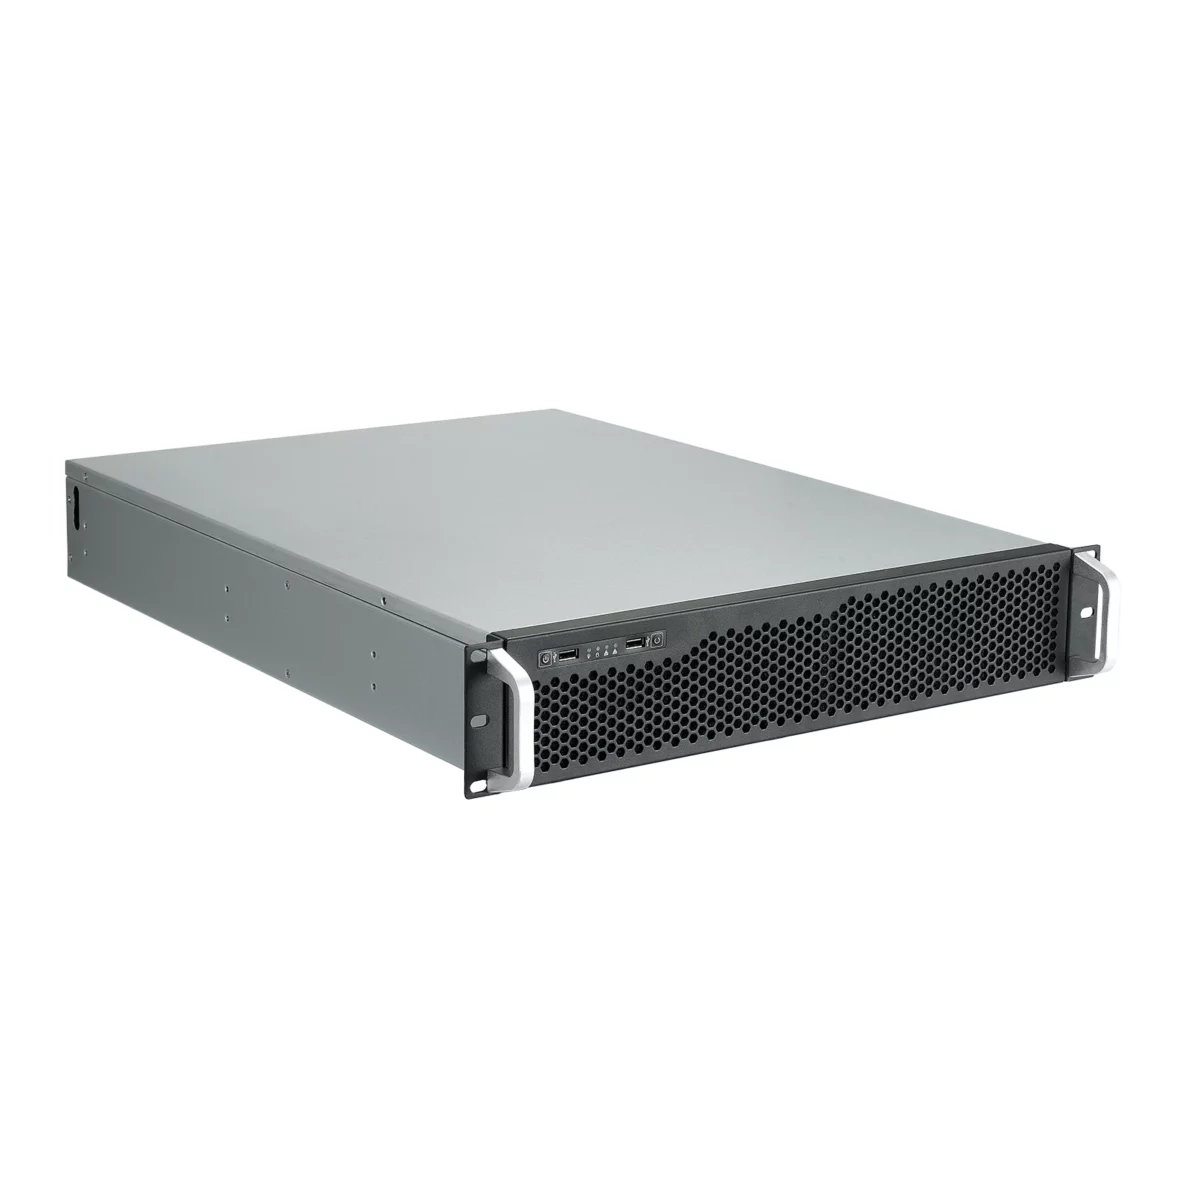 rackmount chassis OC2600-Y side view